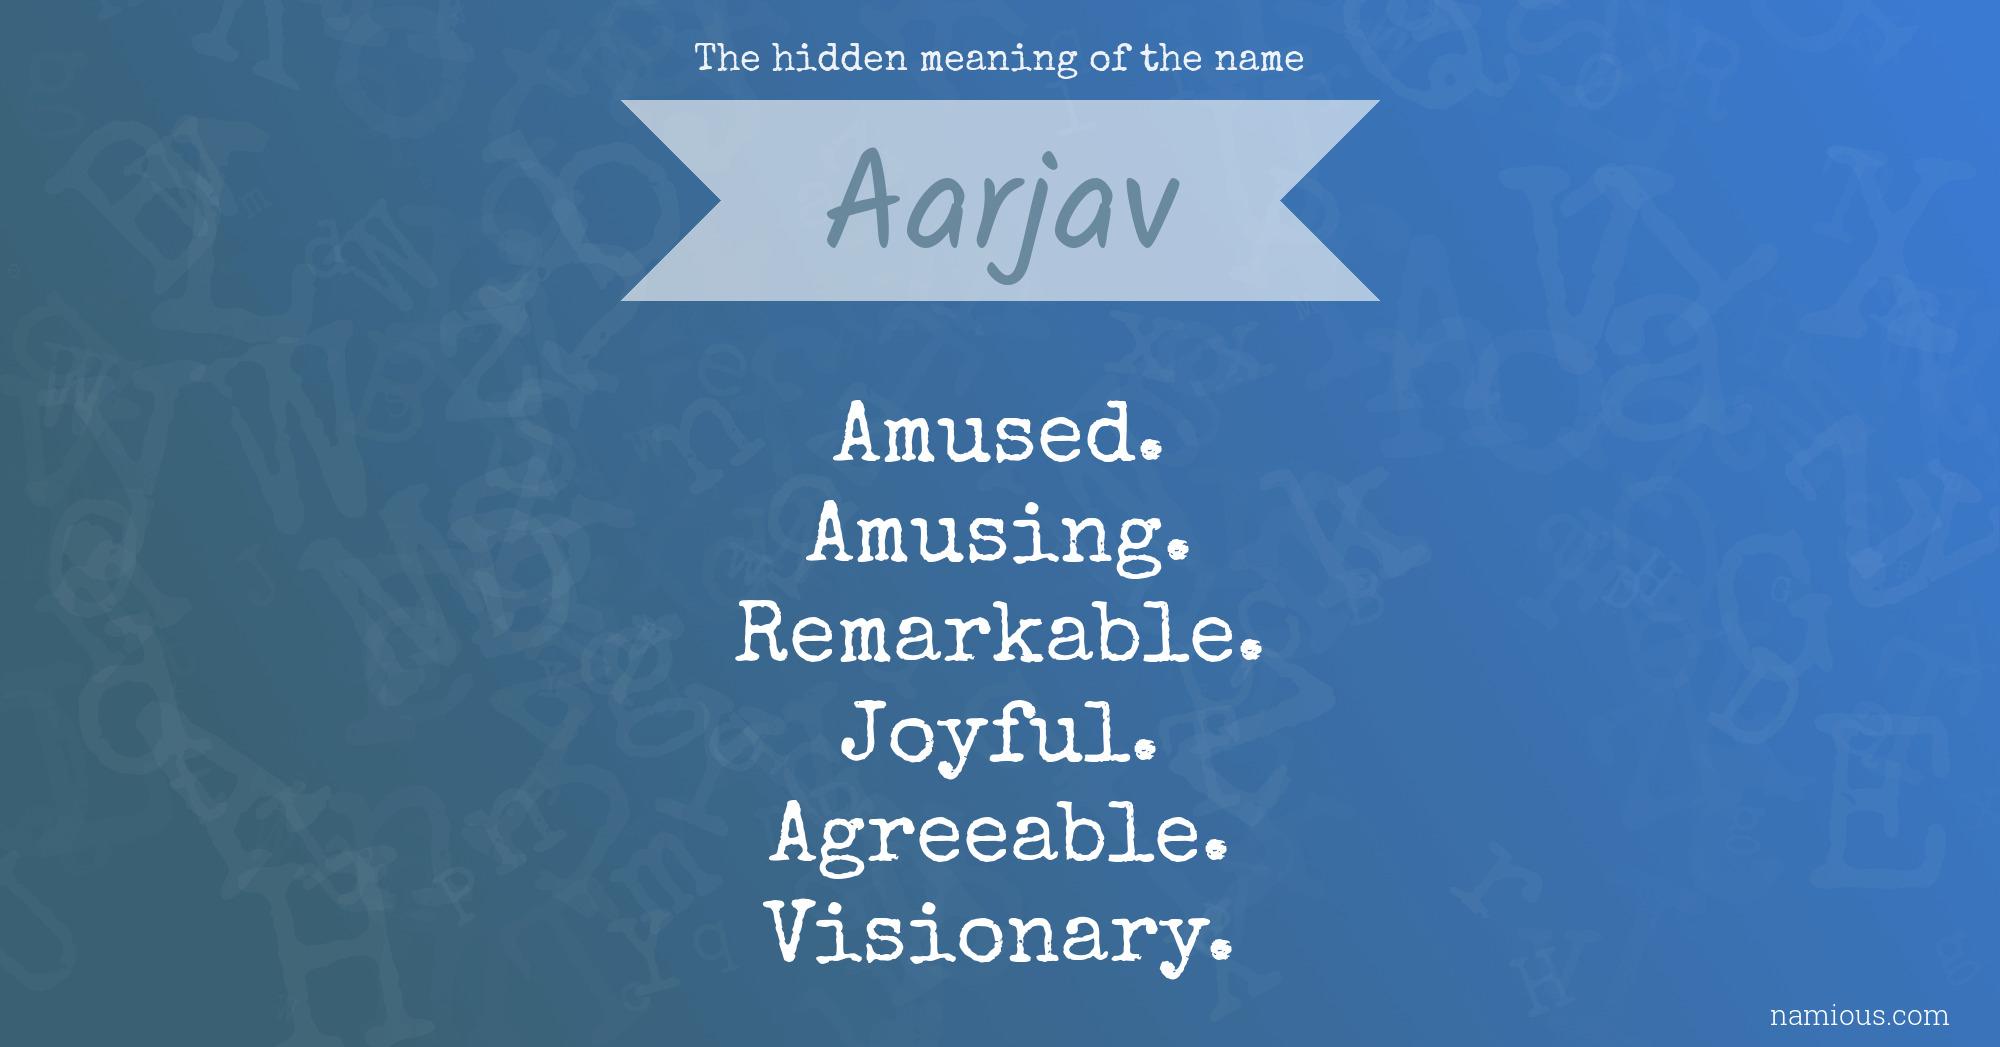 The hidden meaning of the name Aarjav